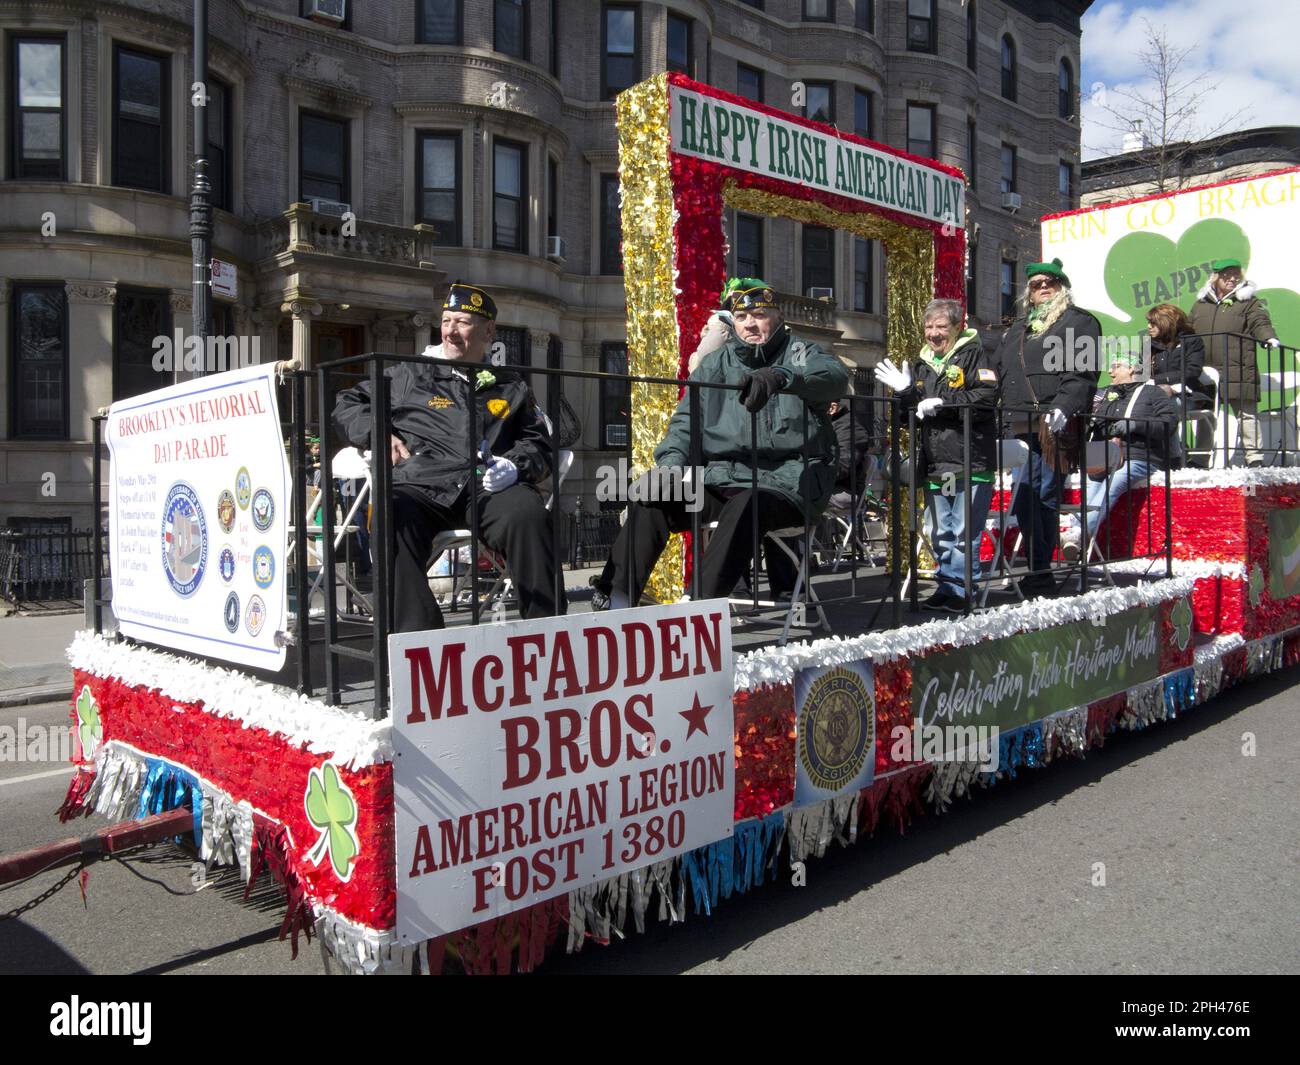 American Legion Post Float in der St. Patrick's Day Parade in Park Slope, Brooklyn, NY Stockfoto